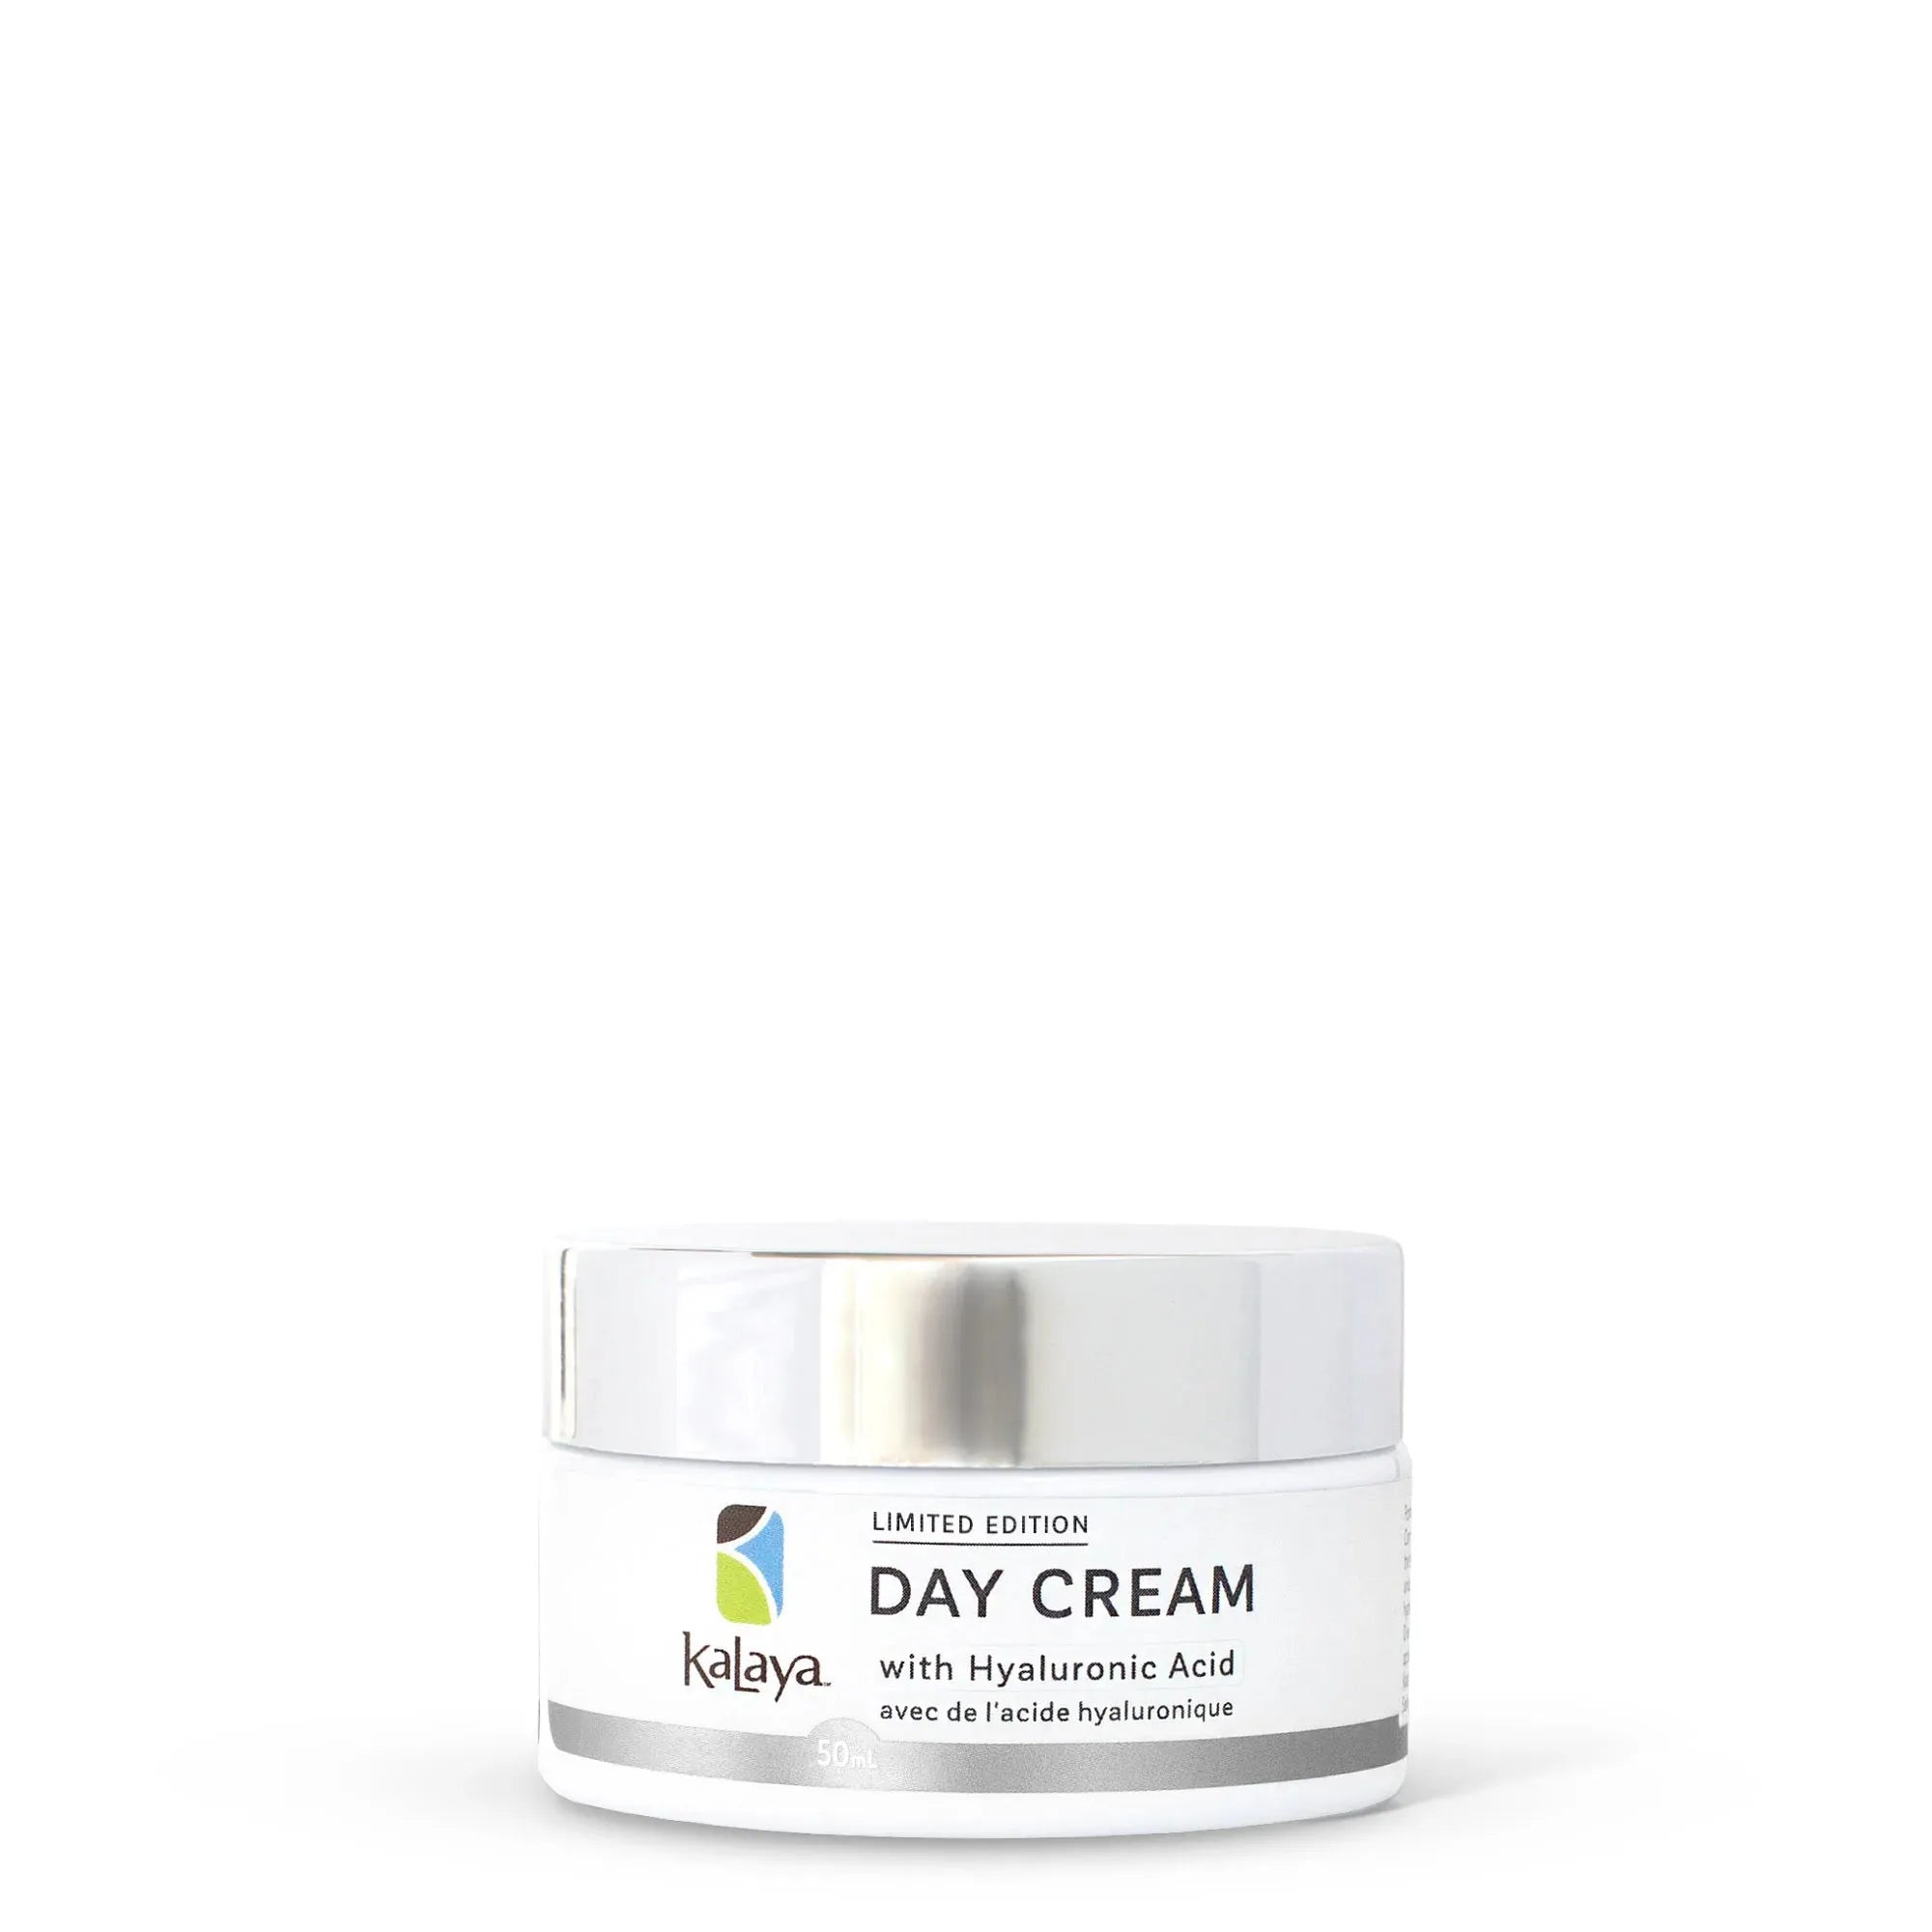 KaLaya Day Cream with Hyaluronic Acid (Limited Edition)